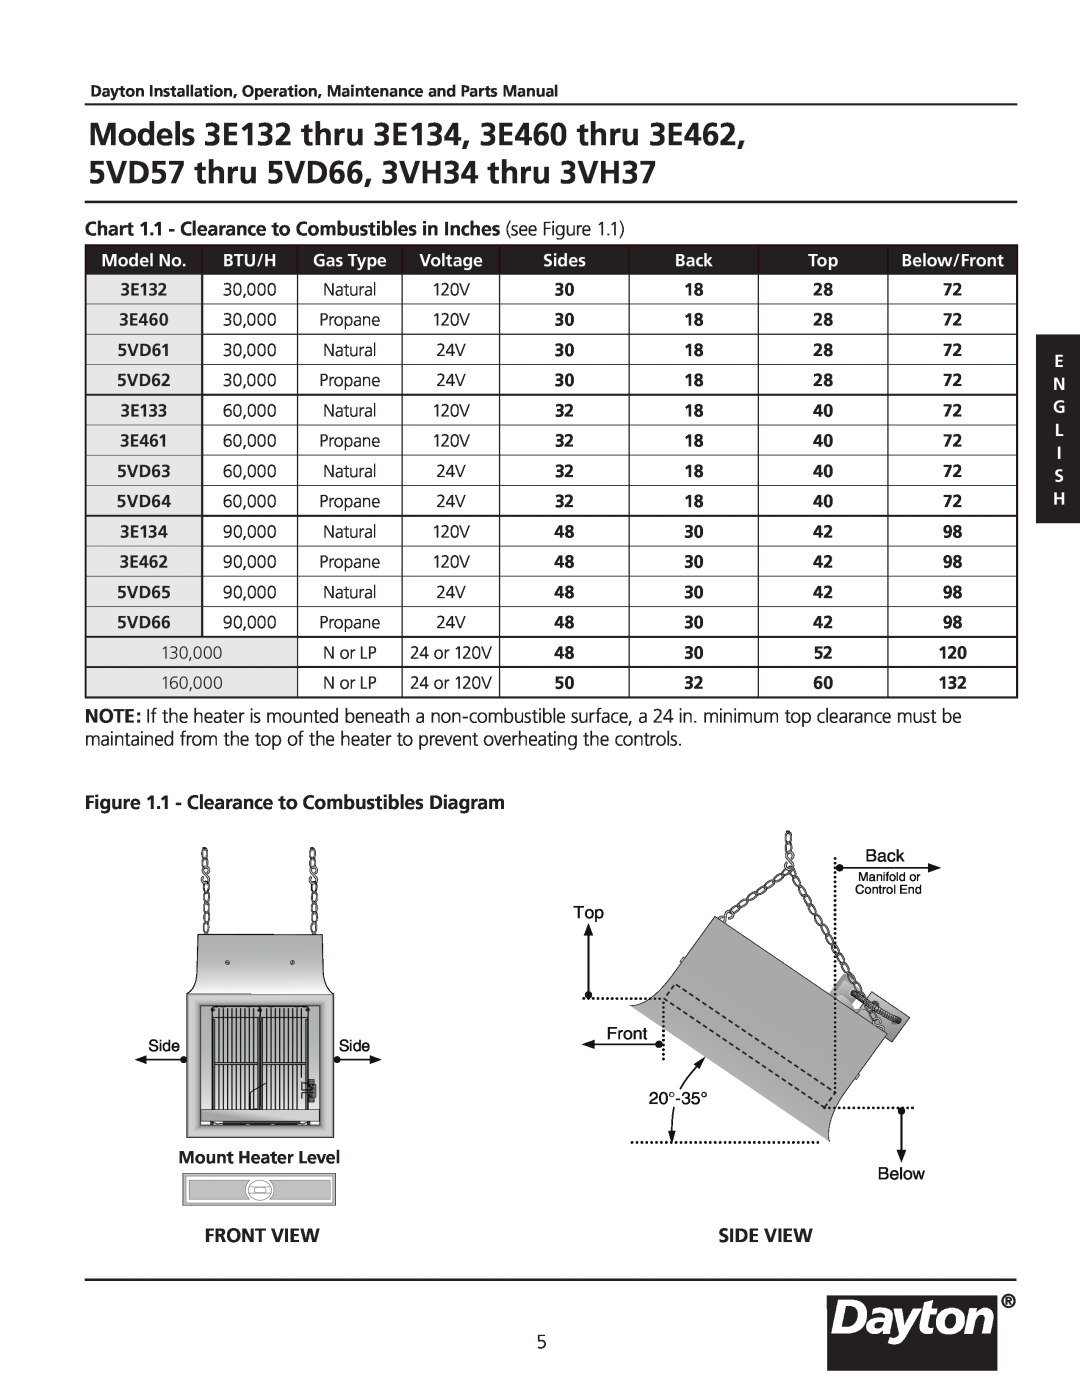 Dayton 3E462 1 - Clearance to Combustibles Diagram, Front View, Side View, 3E132, 30,000, Natural, 3E460, 5VD61, 5VD62 